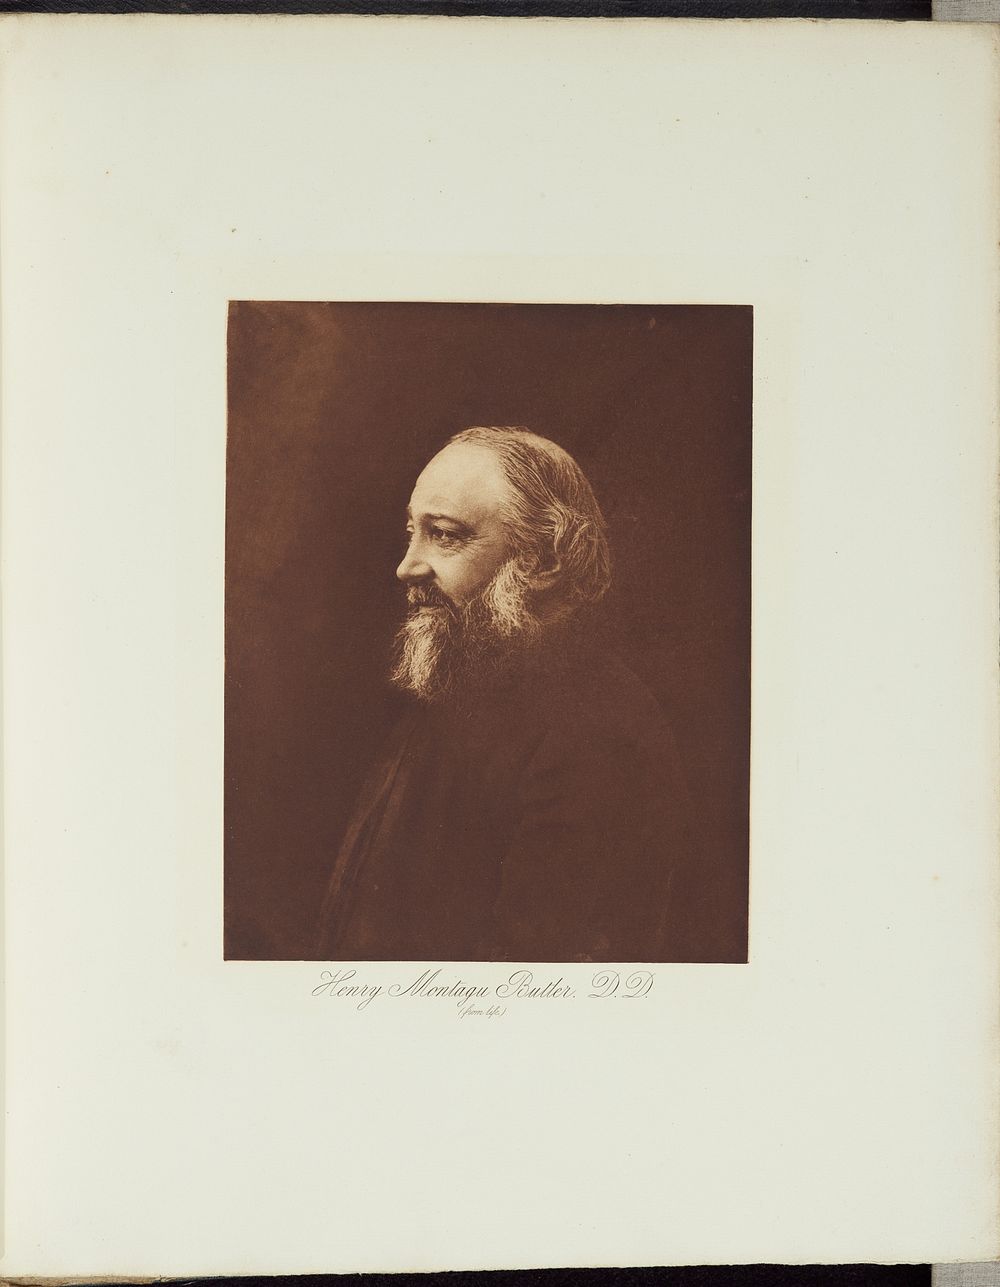 The Very Reverend Dr. Butler (Master of Trinity, Cambridge) by Henry Herschel Hay Cameron